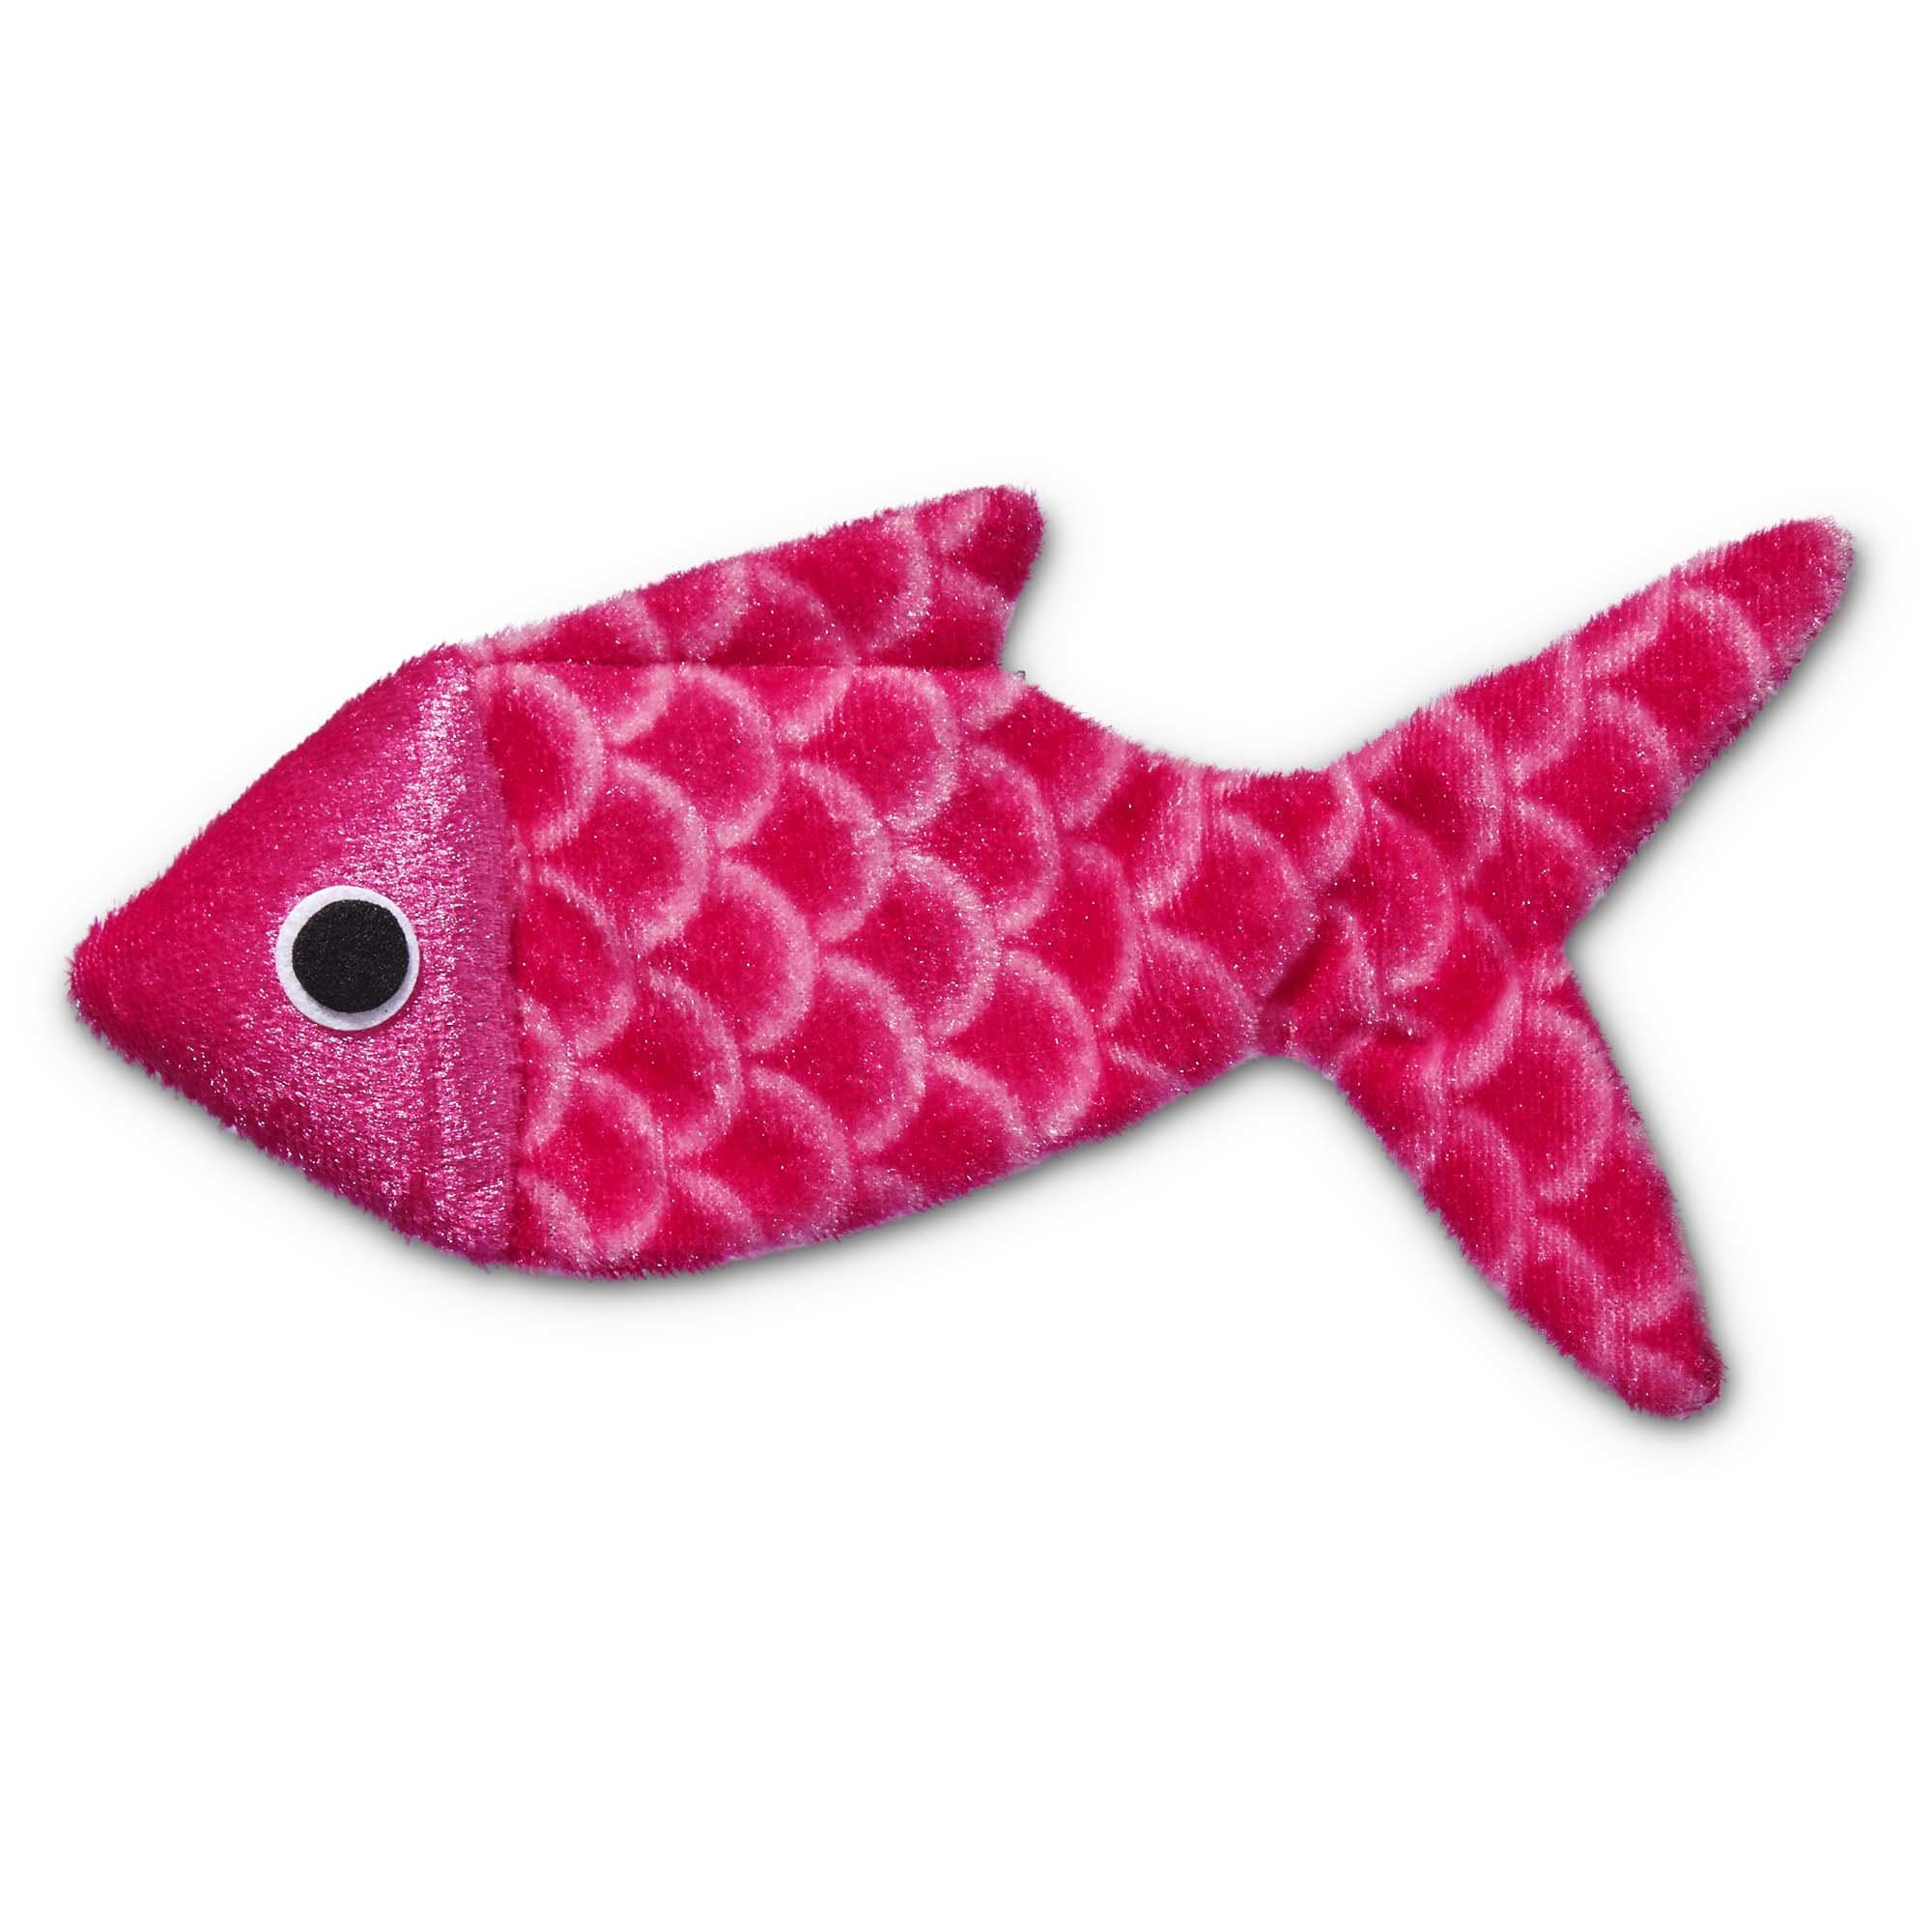 Leaps & Bounds Crinkle Fish Cat Toy